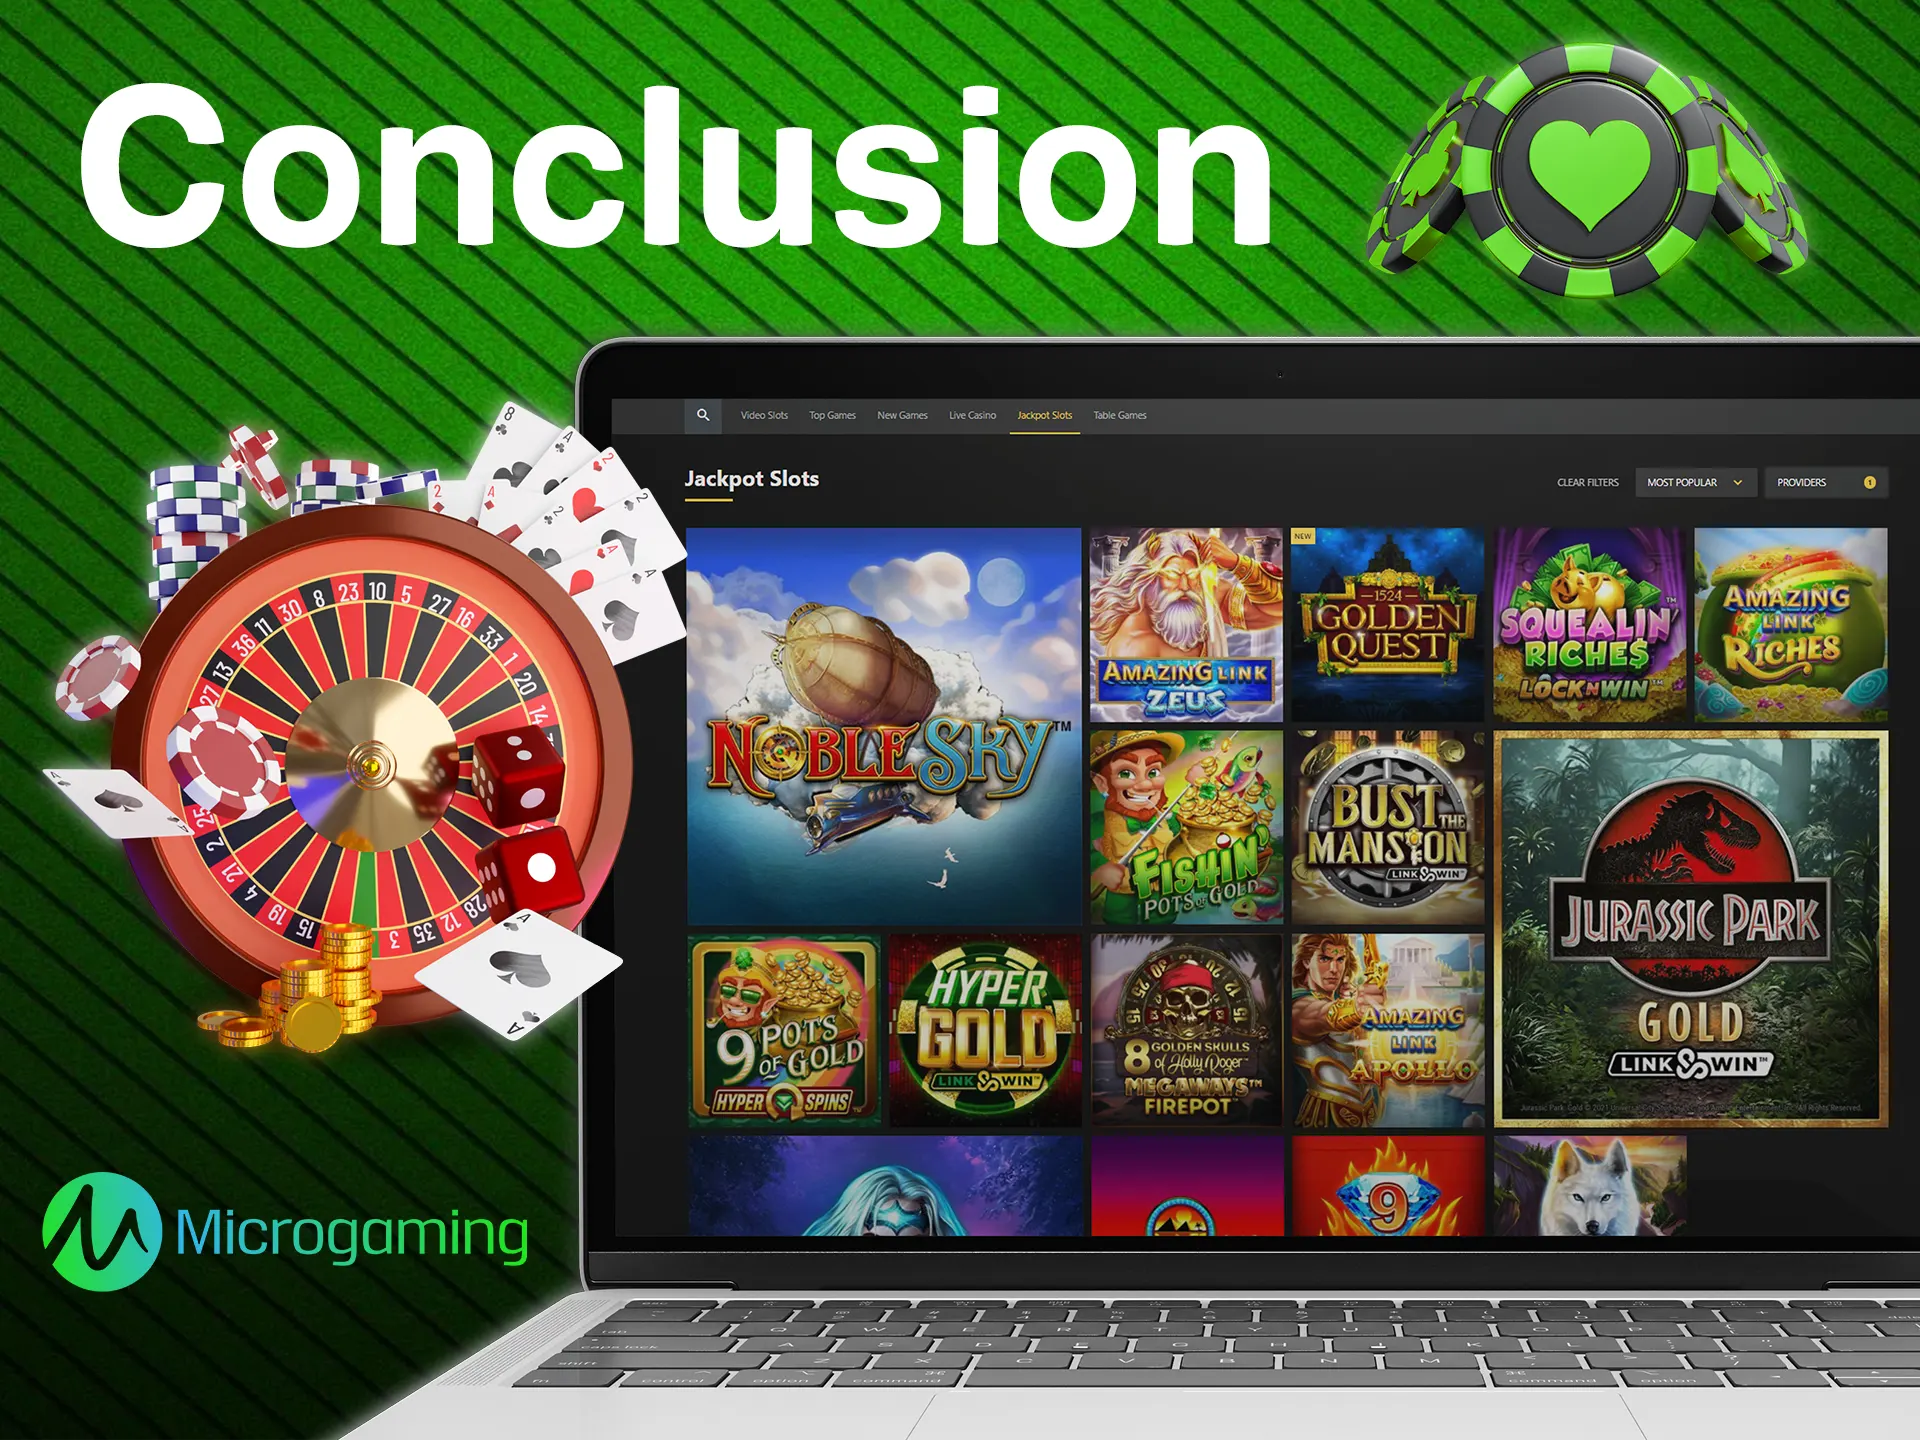 Play Microgaming casino games and win a lot of money.